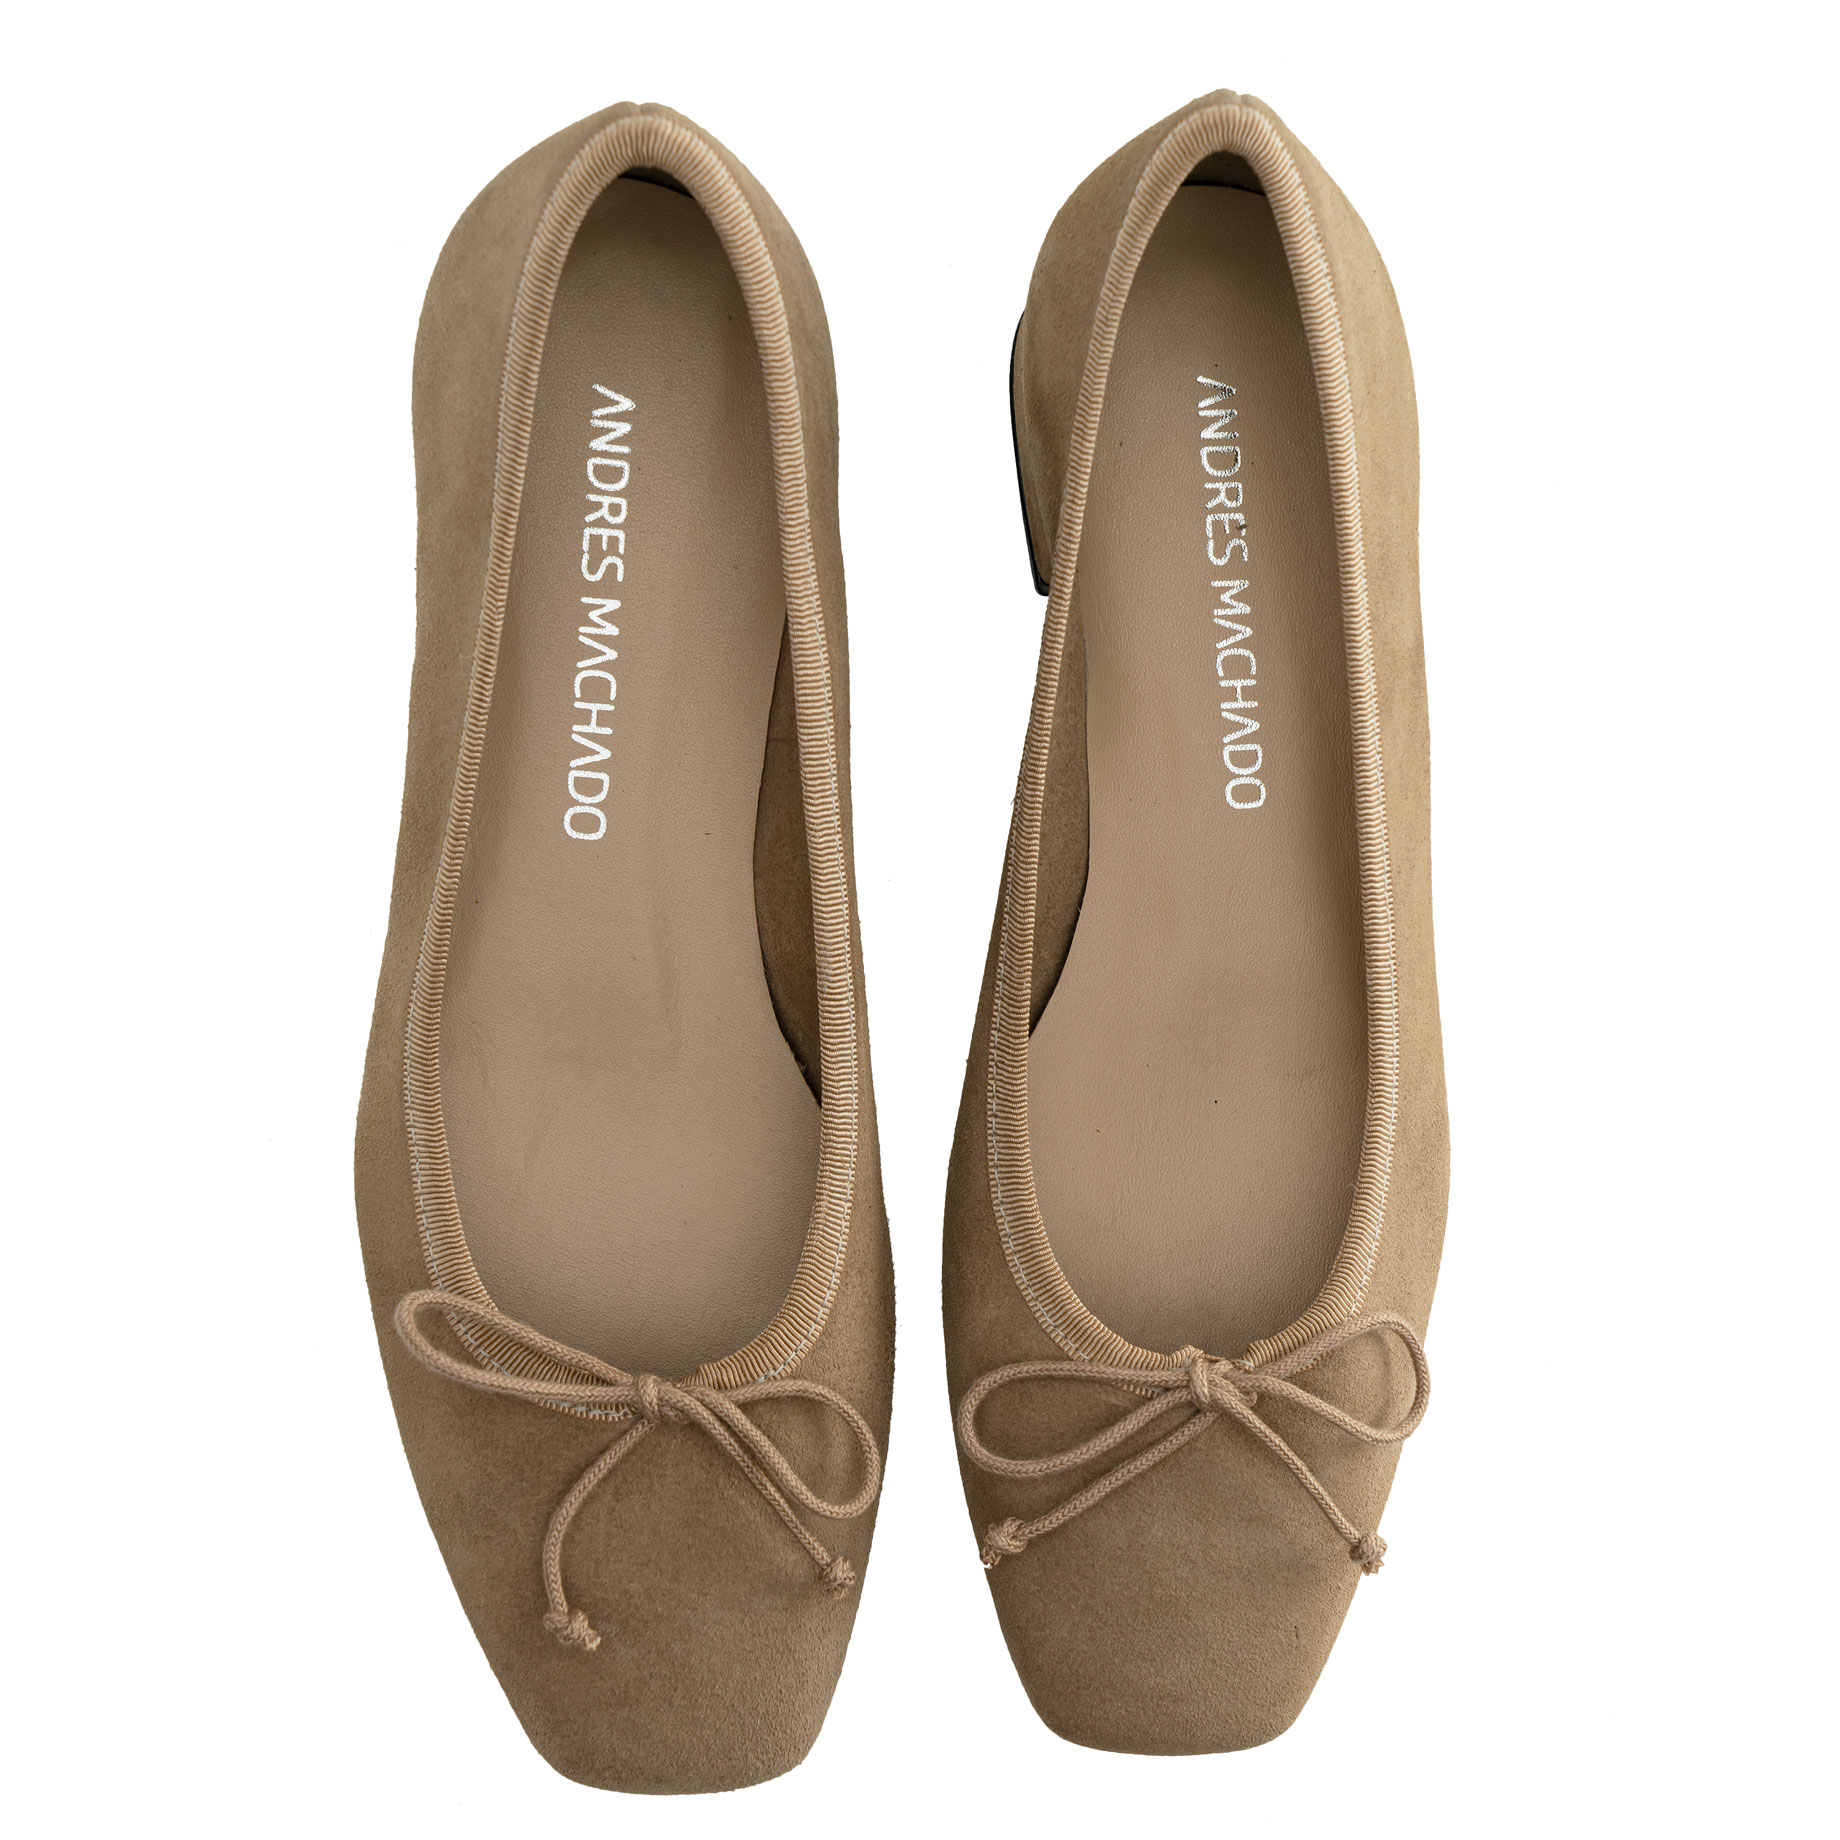 Bowtie Ballet Flats in Taupe Split Leather 